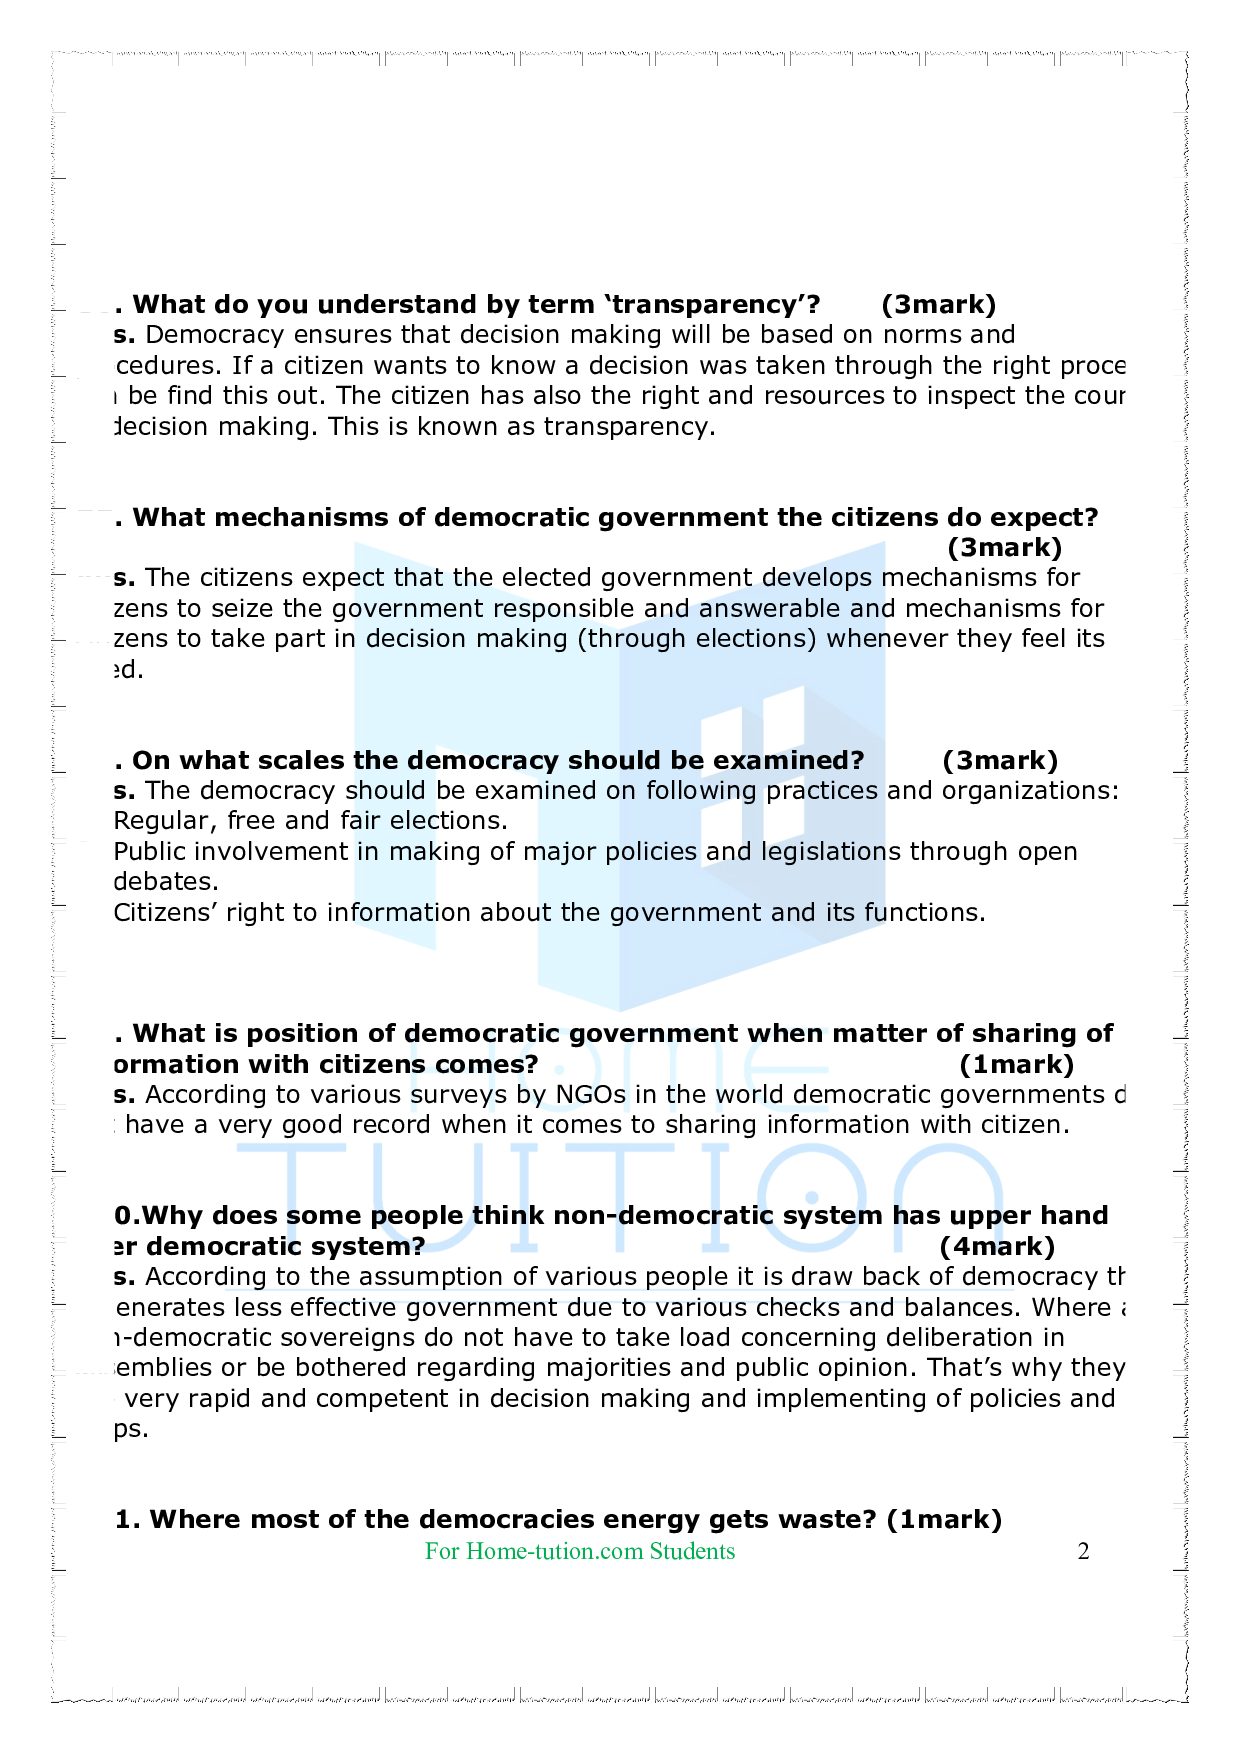 Chapter-7 Outcomes of Democracy Questions